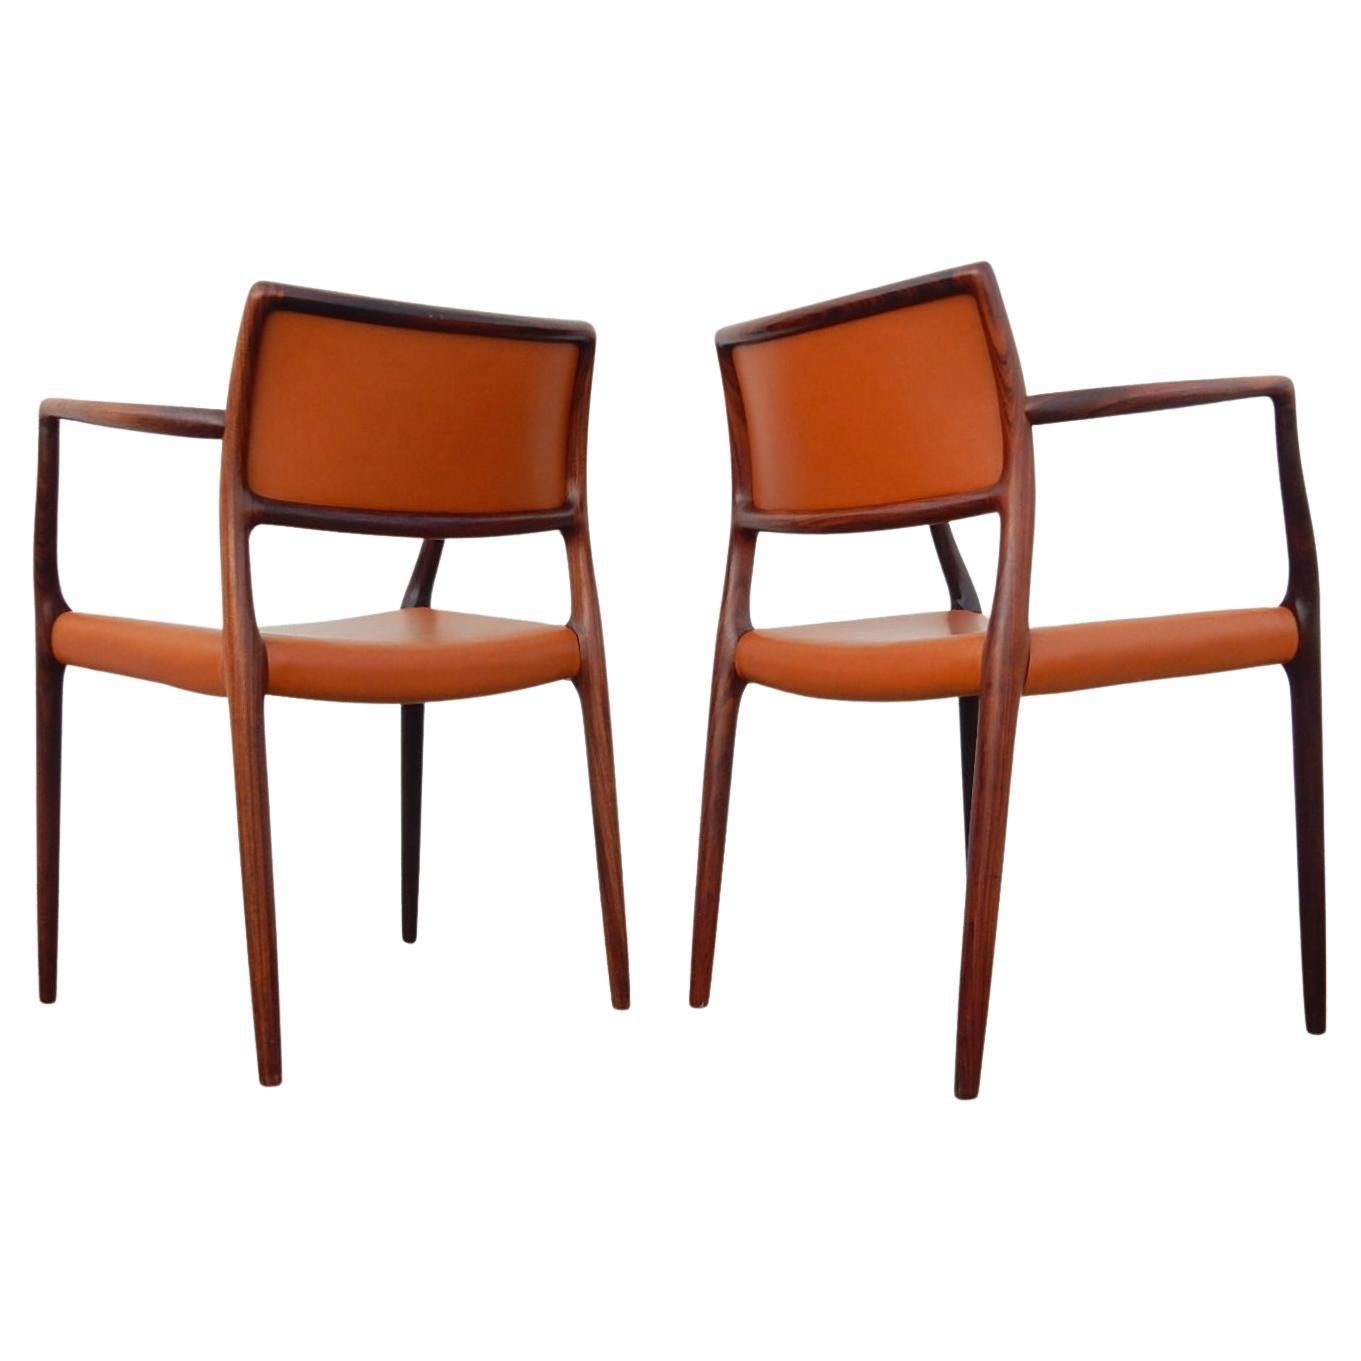 Mid-20th Century 8 Danish Modern Niels Otto Møller Sculpted Rosewood Dining Arm Chairs For Sale